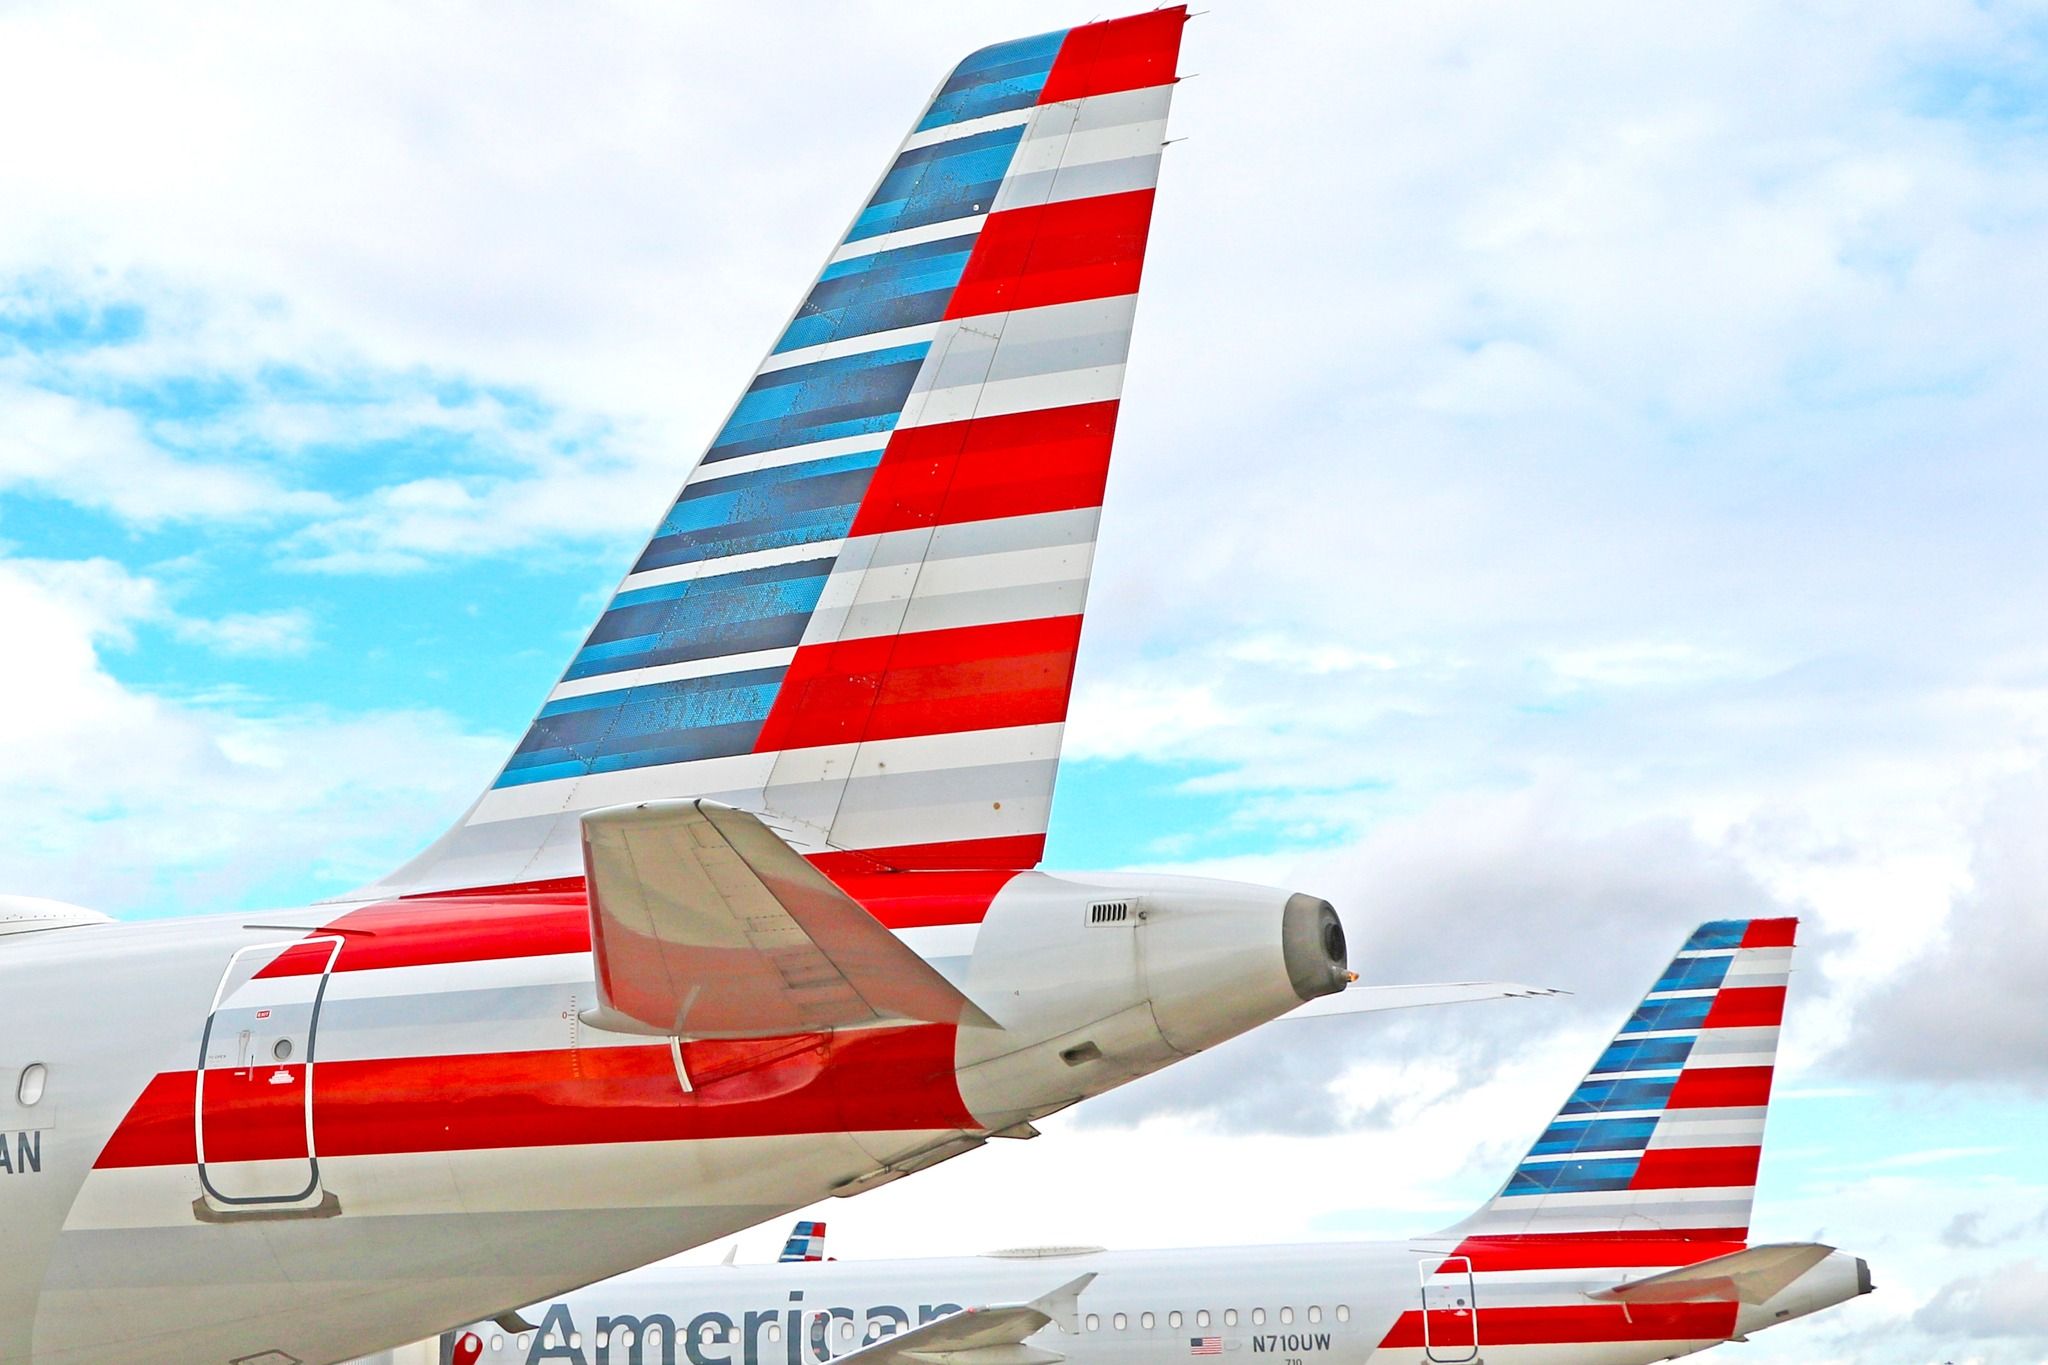 American Airlines Airbus aircraft tails at Orlando International Airport.